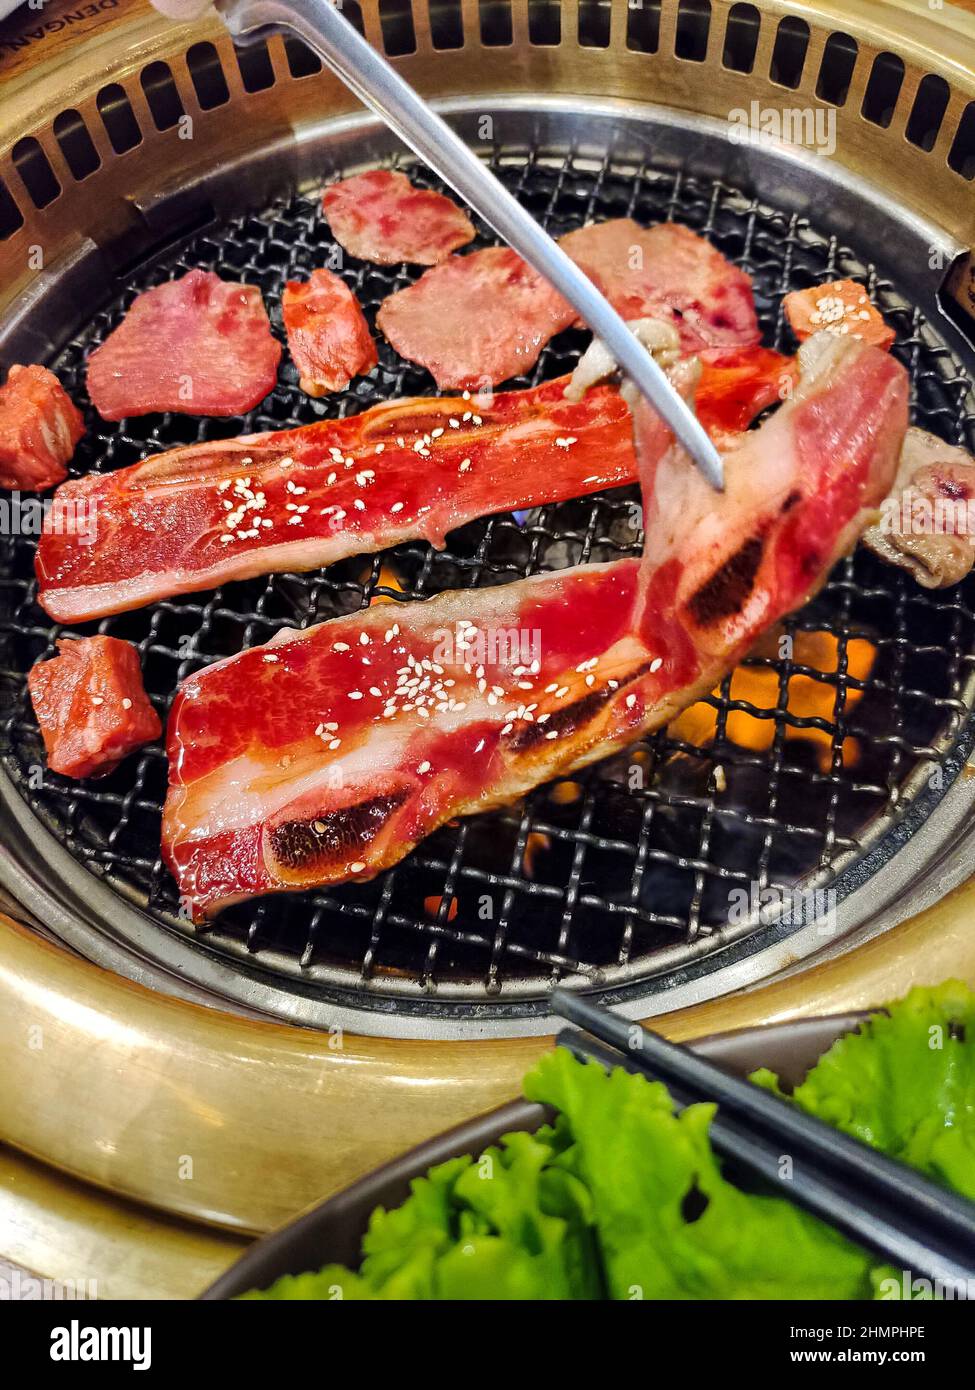 Close-up of meat being cooked on a barbecue Stock Photo